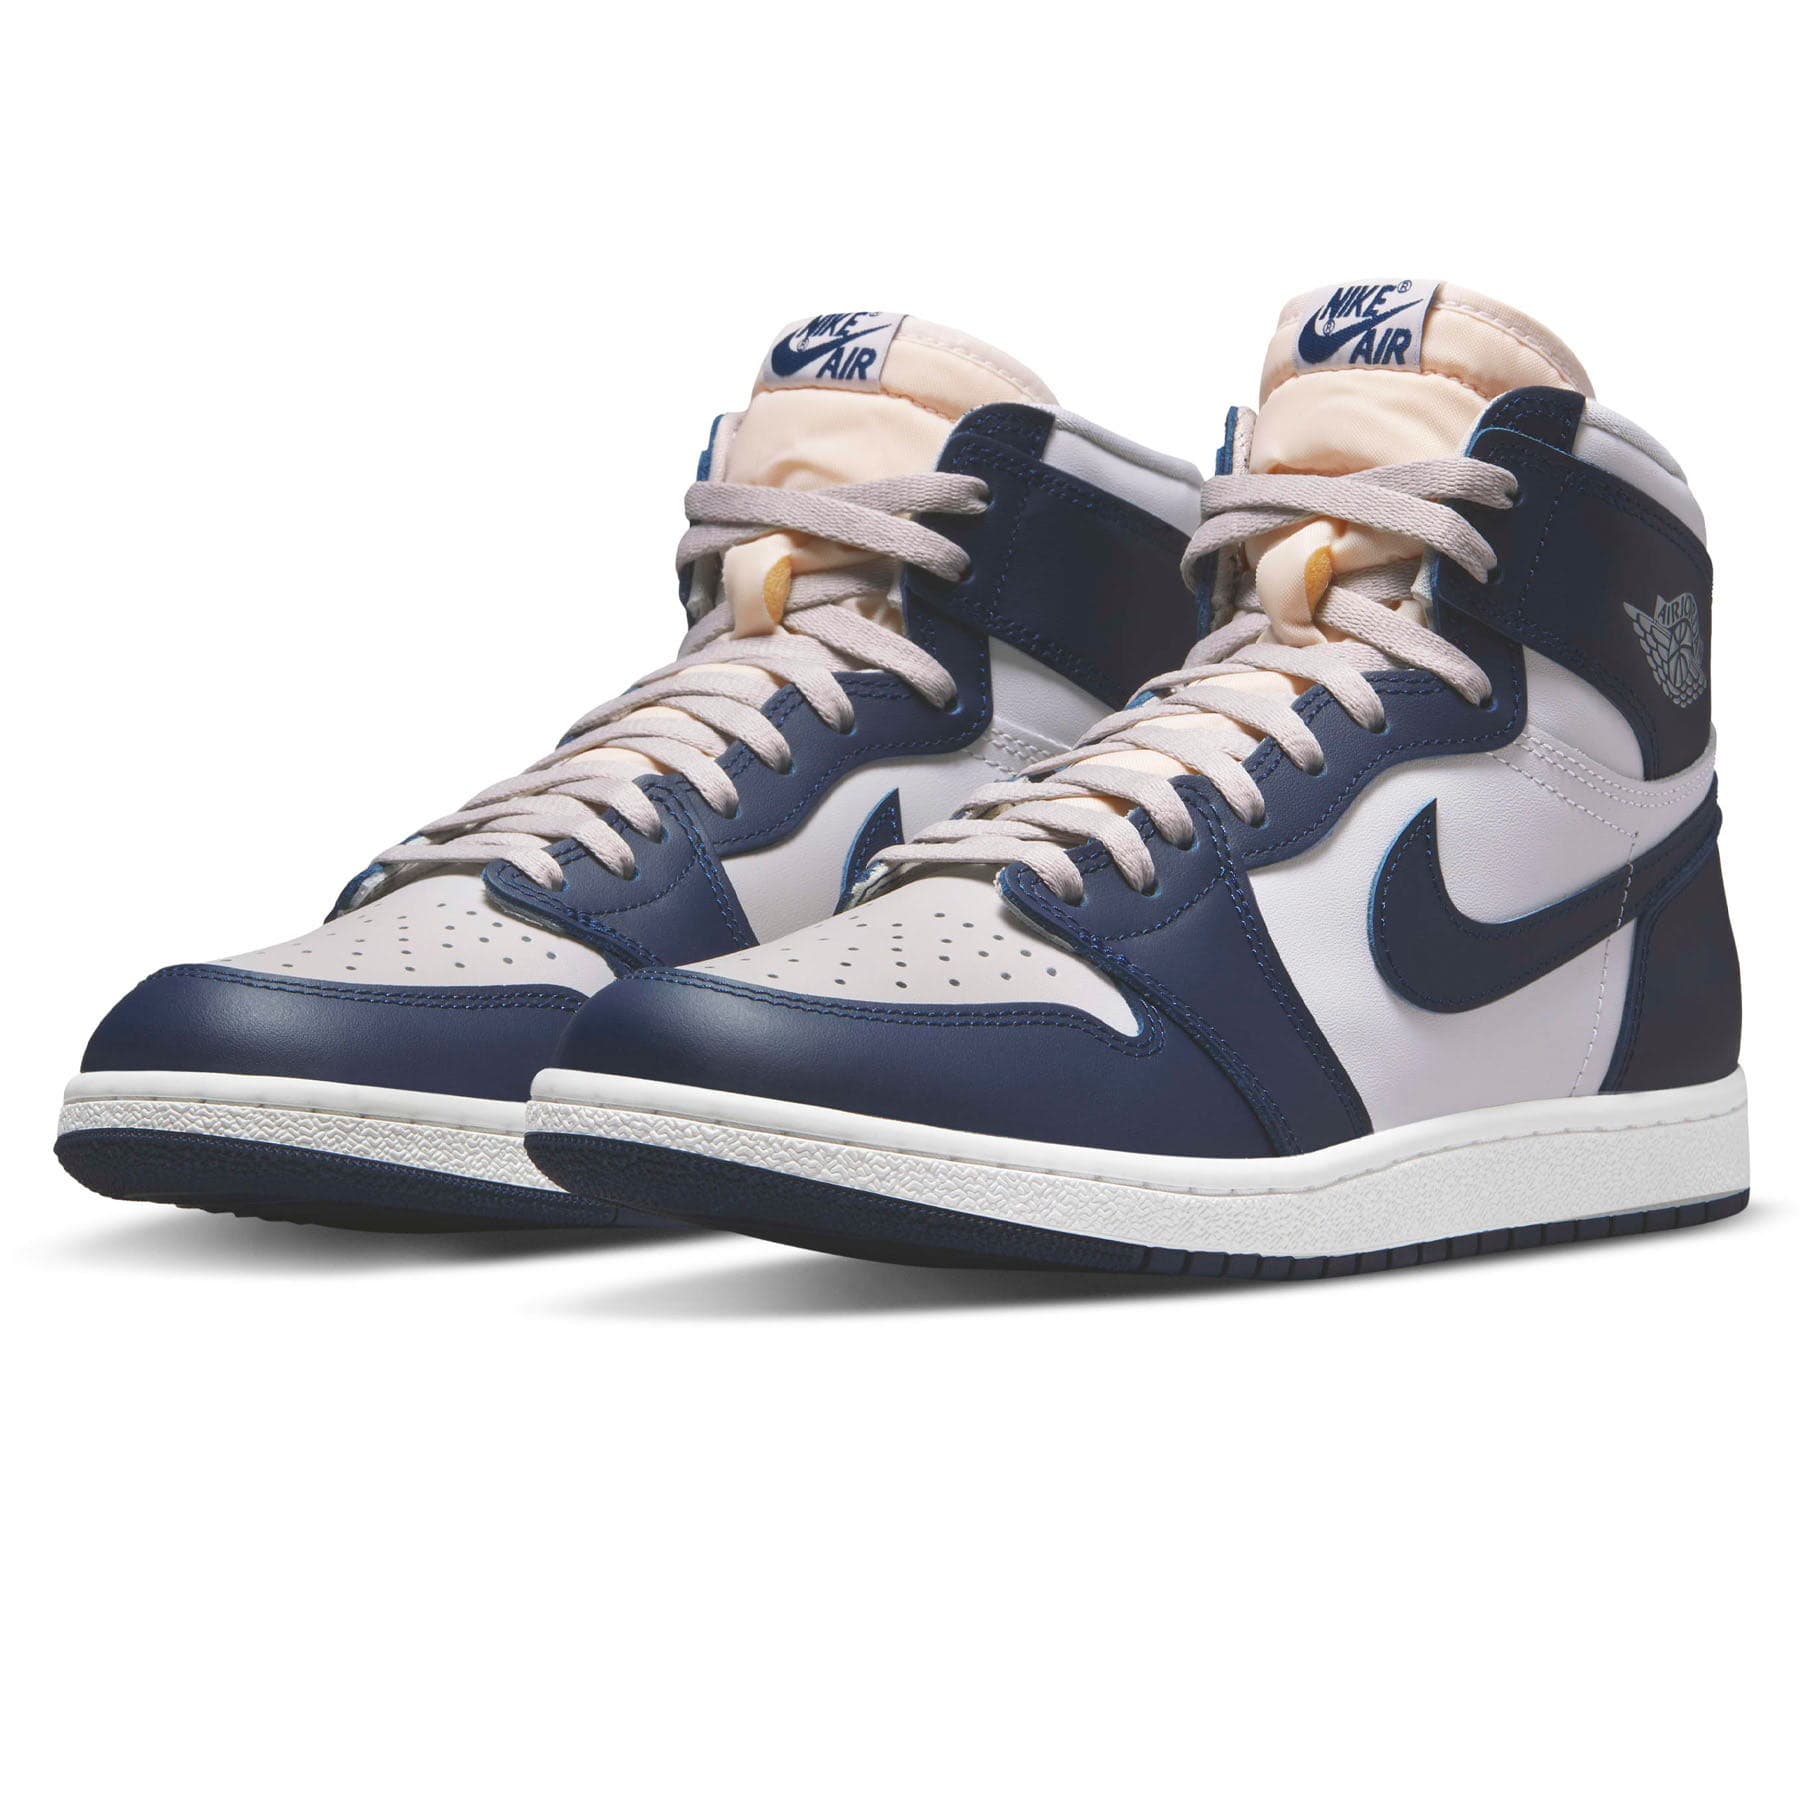 Double Boxed  449.99 Nike Air Jordan 1 Retro High 85 Georgetown Double Boxed